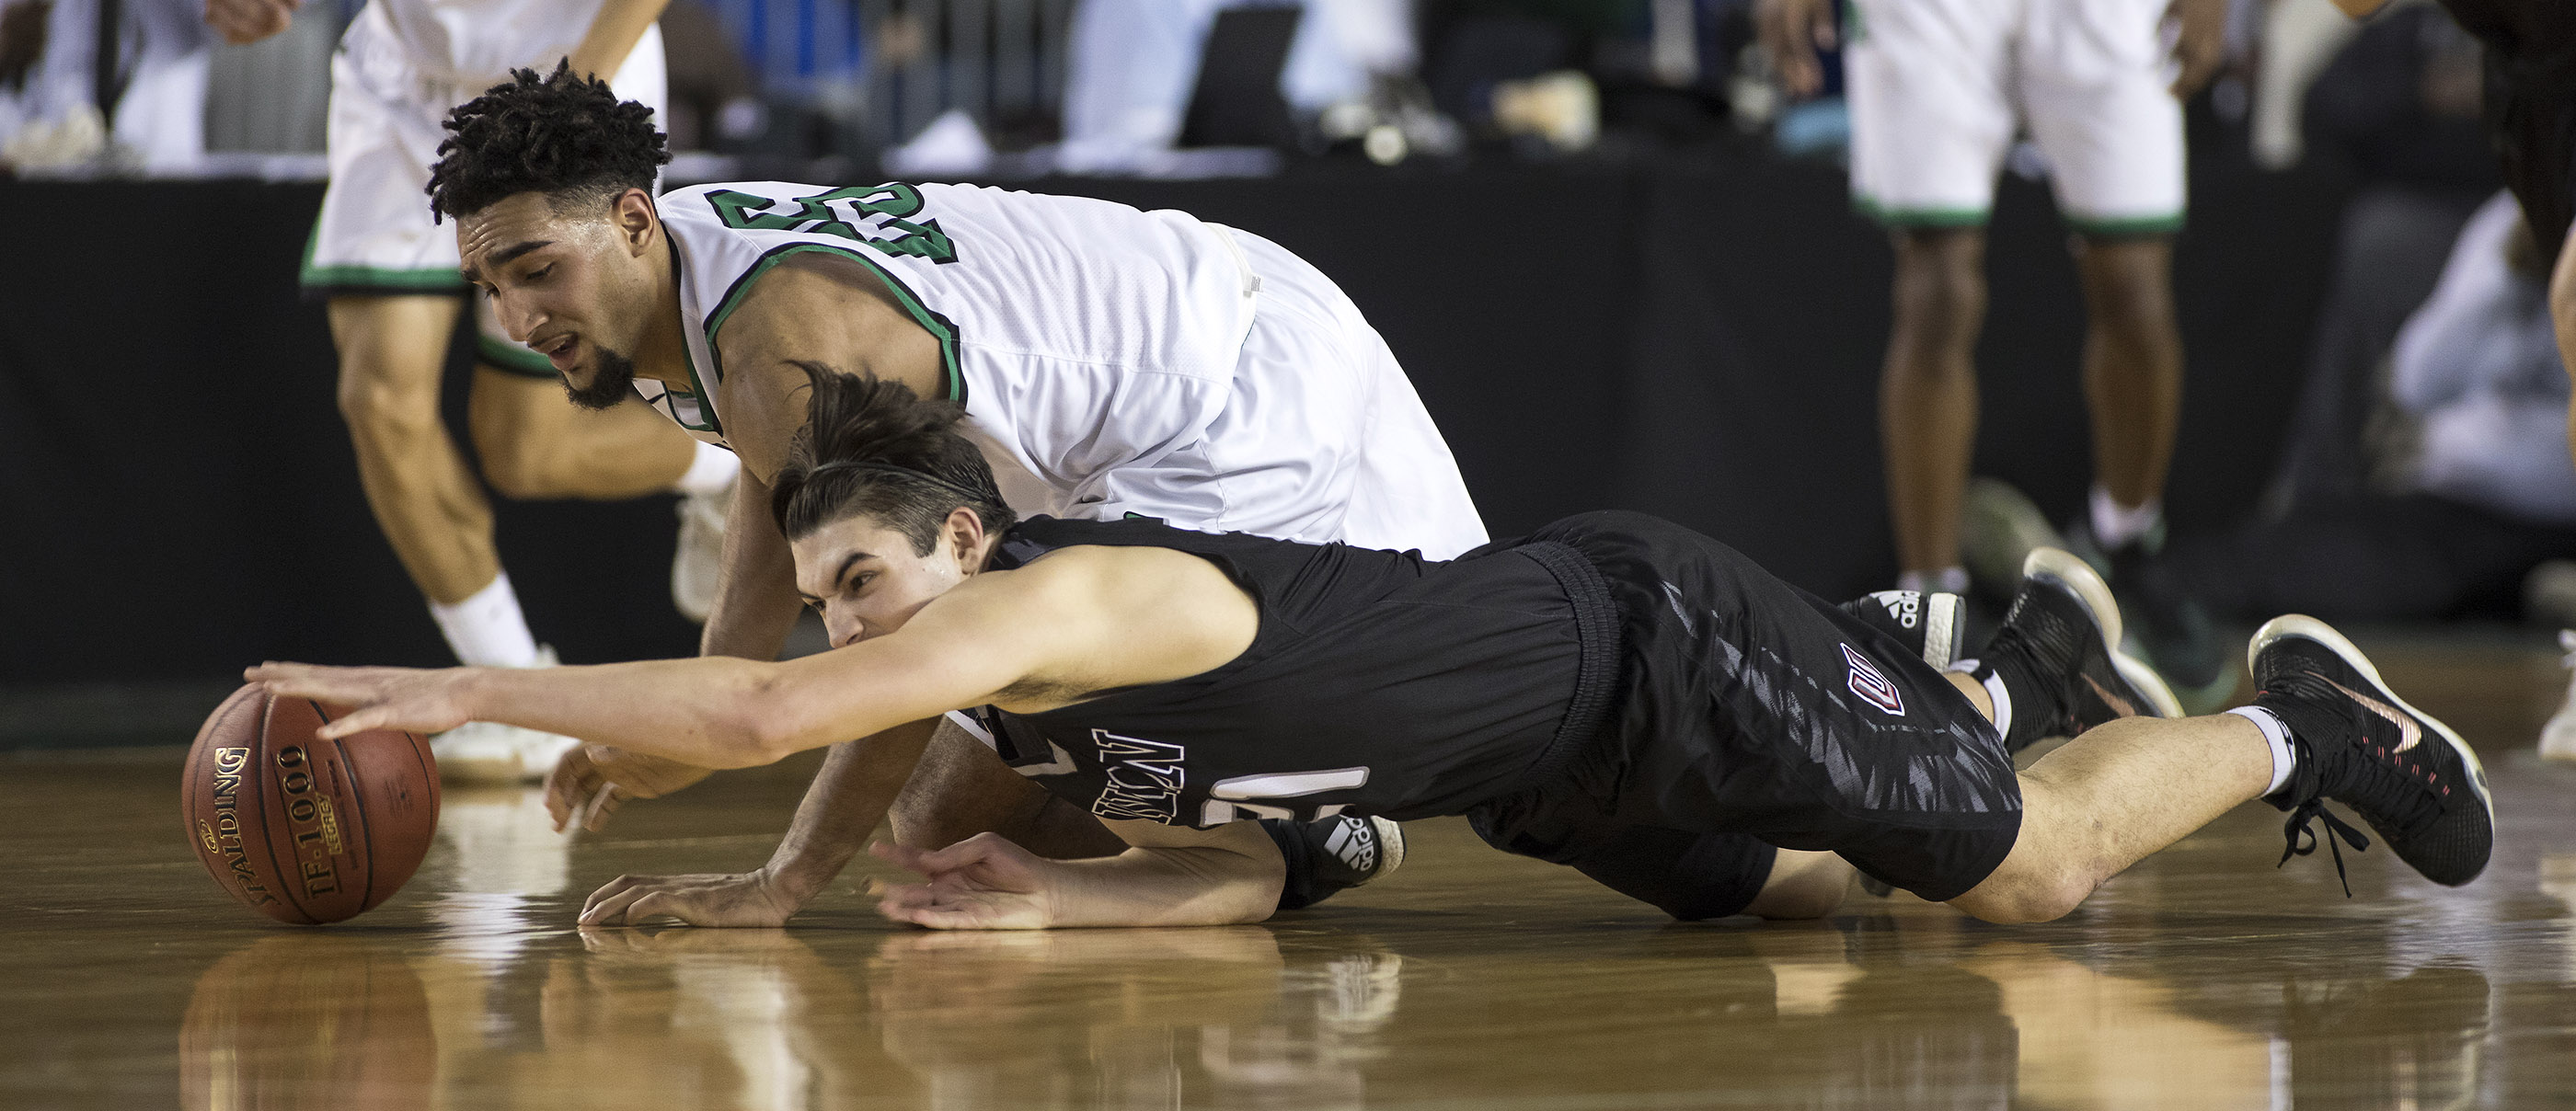 Union's Austin Lewis, below, fights for a loose ball with Kentwood's Darius Lubom Saturday, March 4, 2017, during the 4A Boys State Basketball Tournament Championship game in Tacoma, Wash. Union lost 81-61 to take seconnd place.